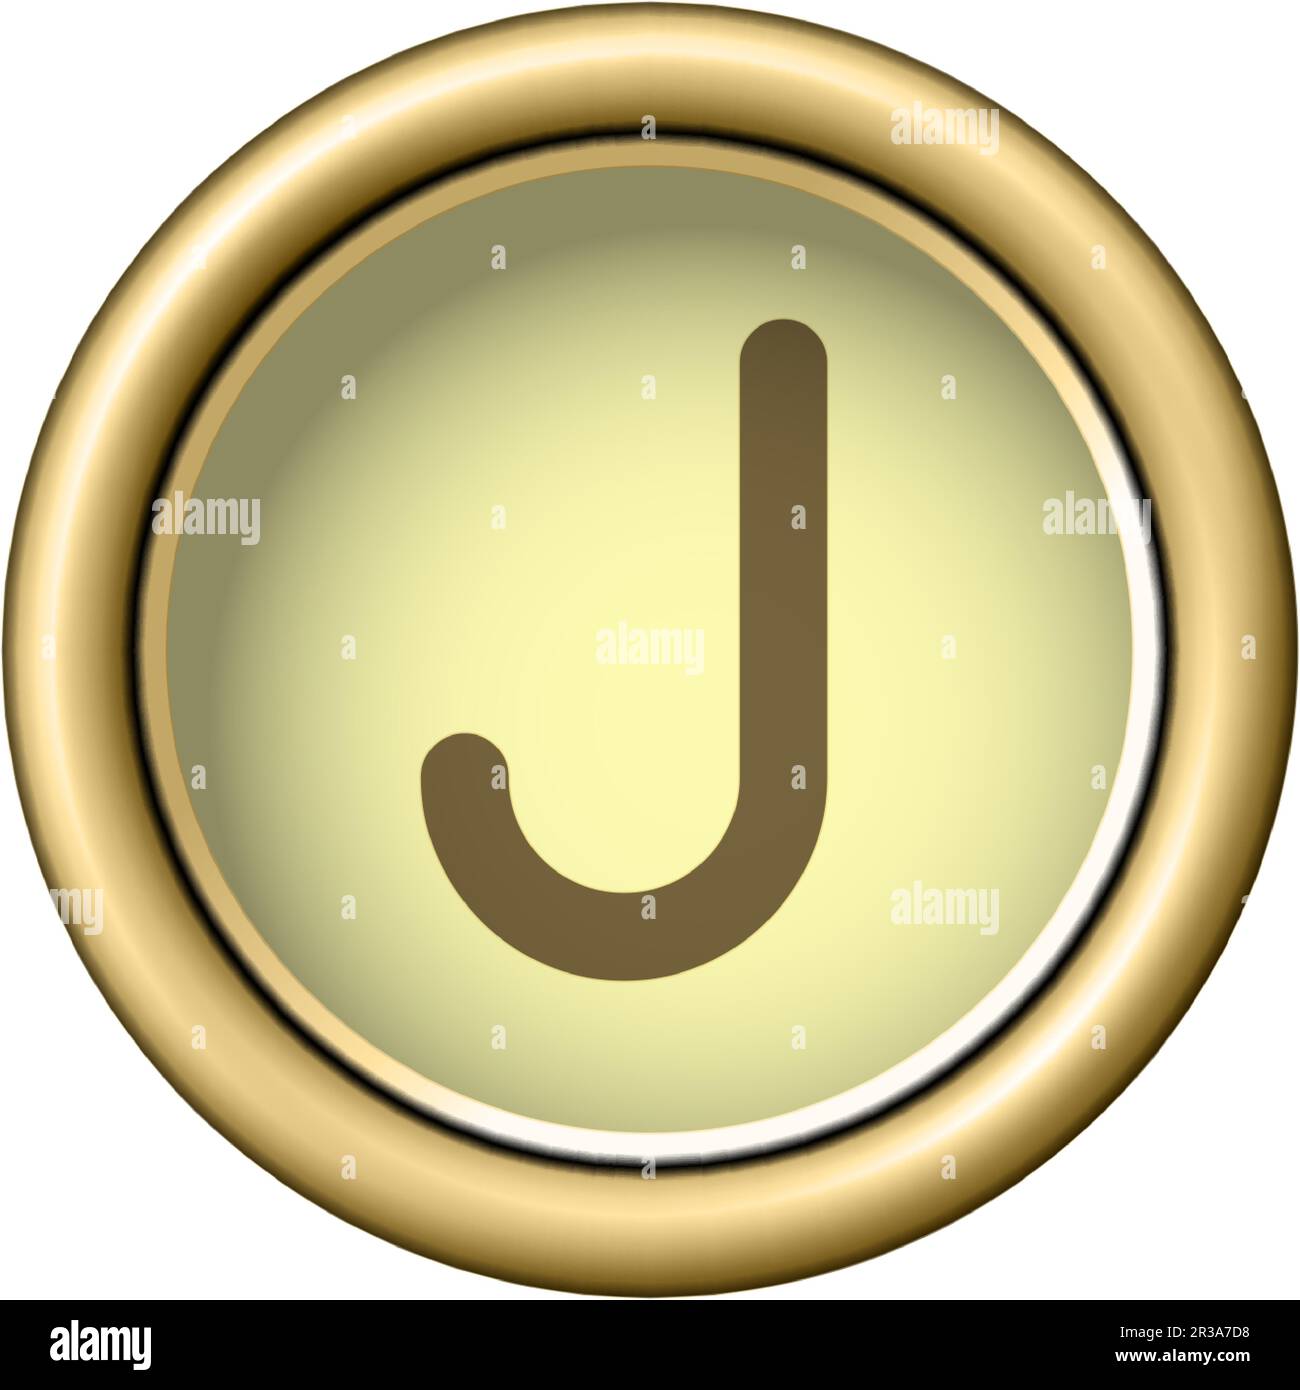 Letter J. Vintage golden typewriter button isolated on white background. Graphic design element for scrapbooking, sticker, web site, symbol, icon. Vec Stock Vector